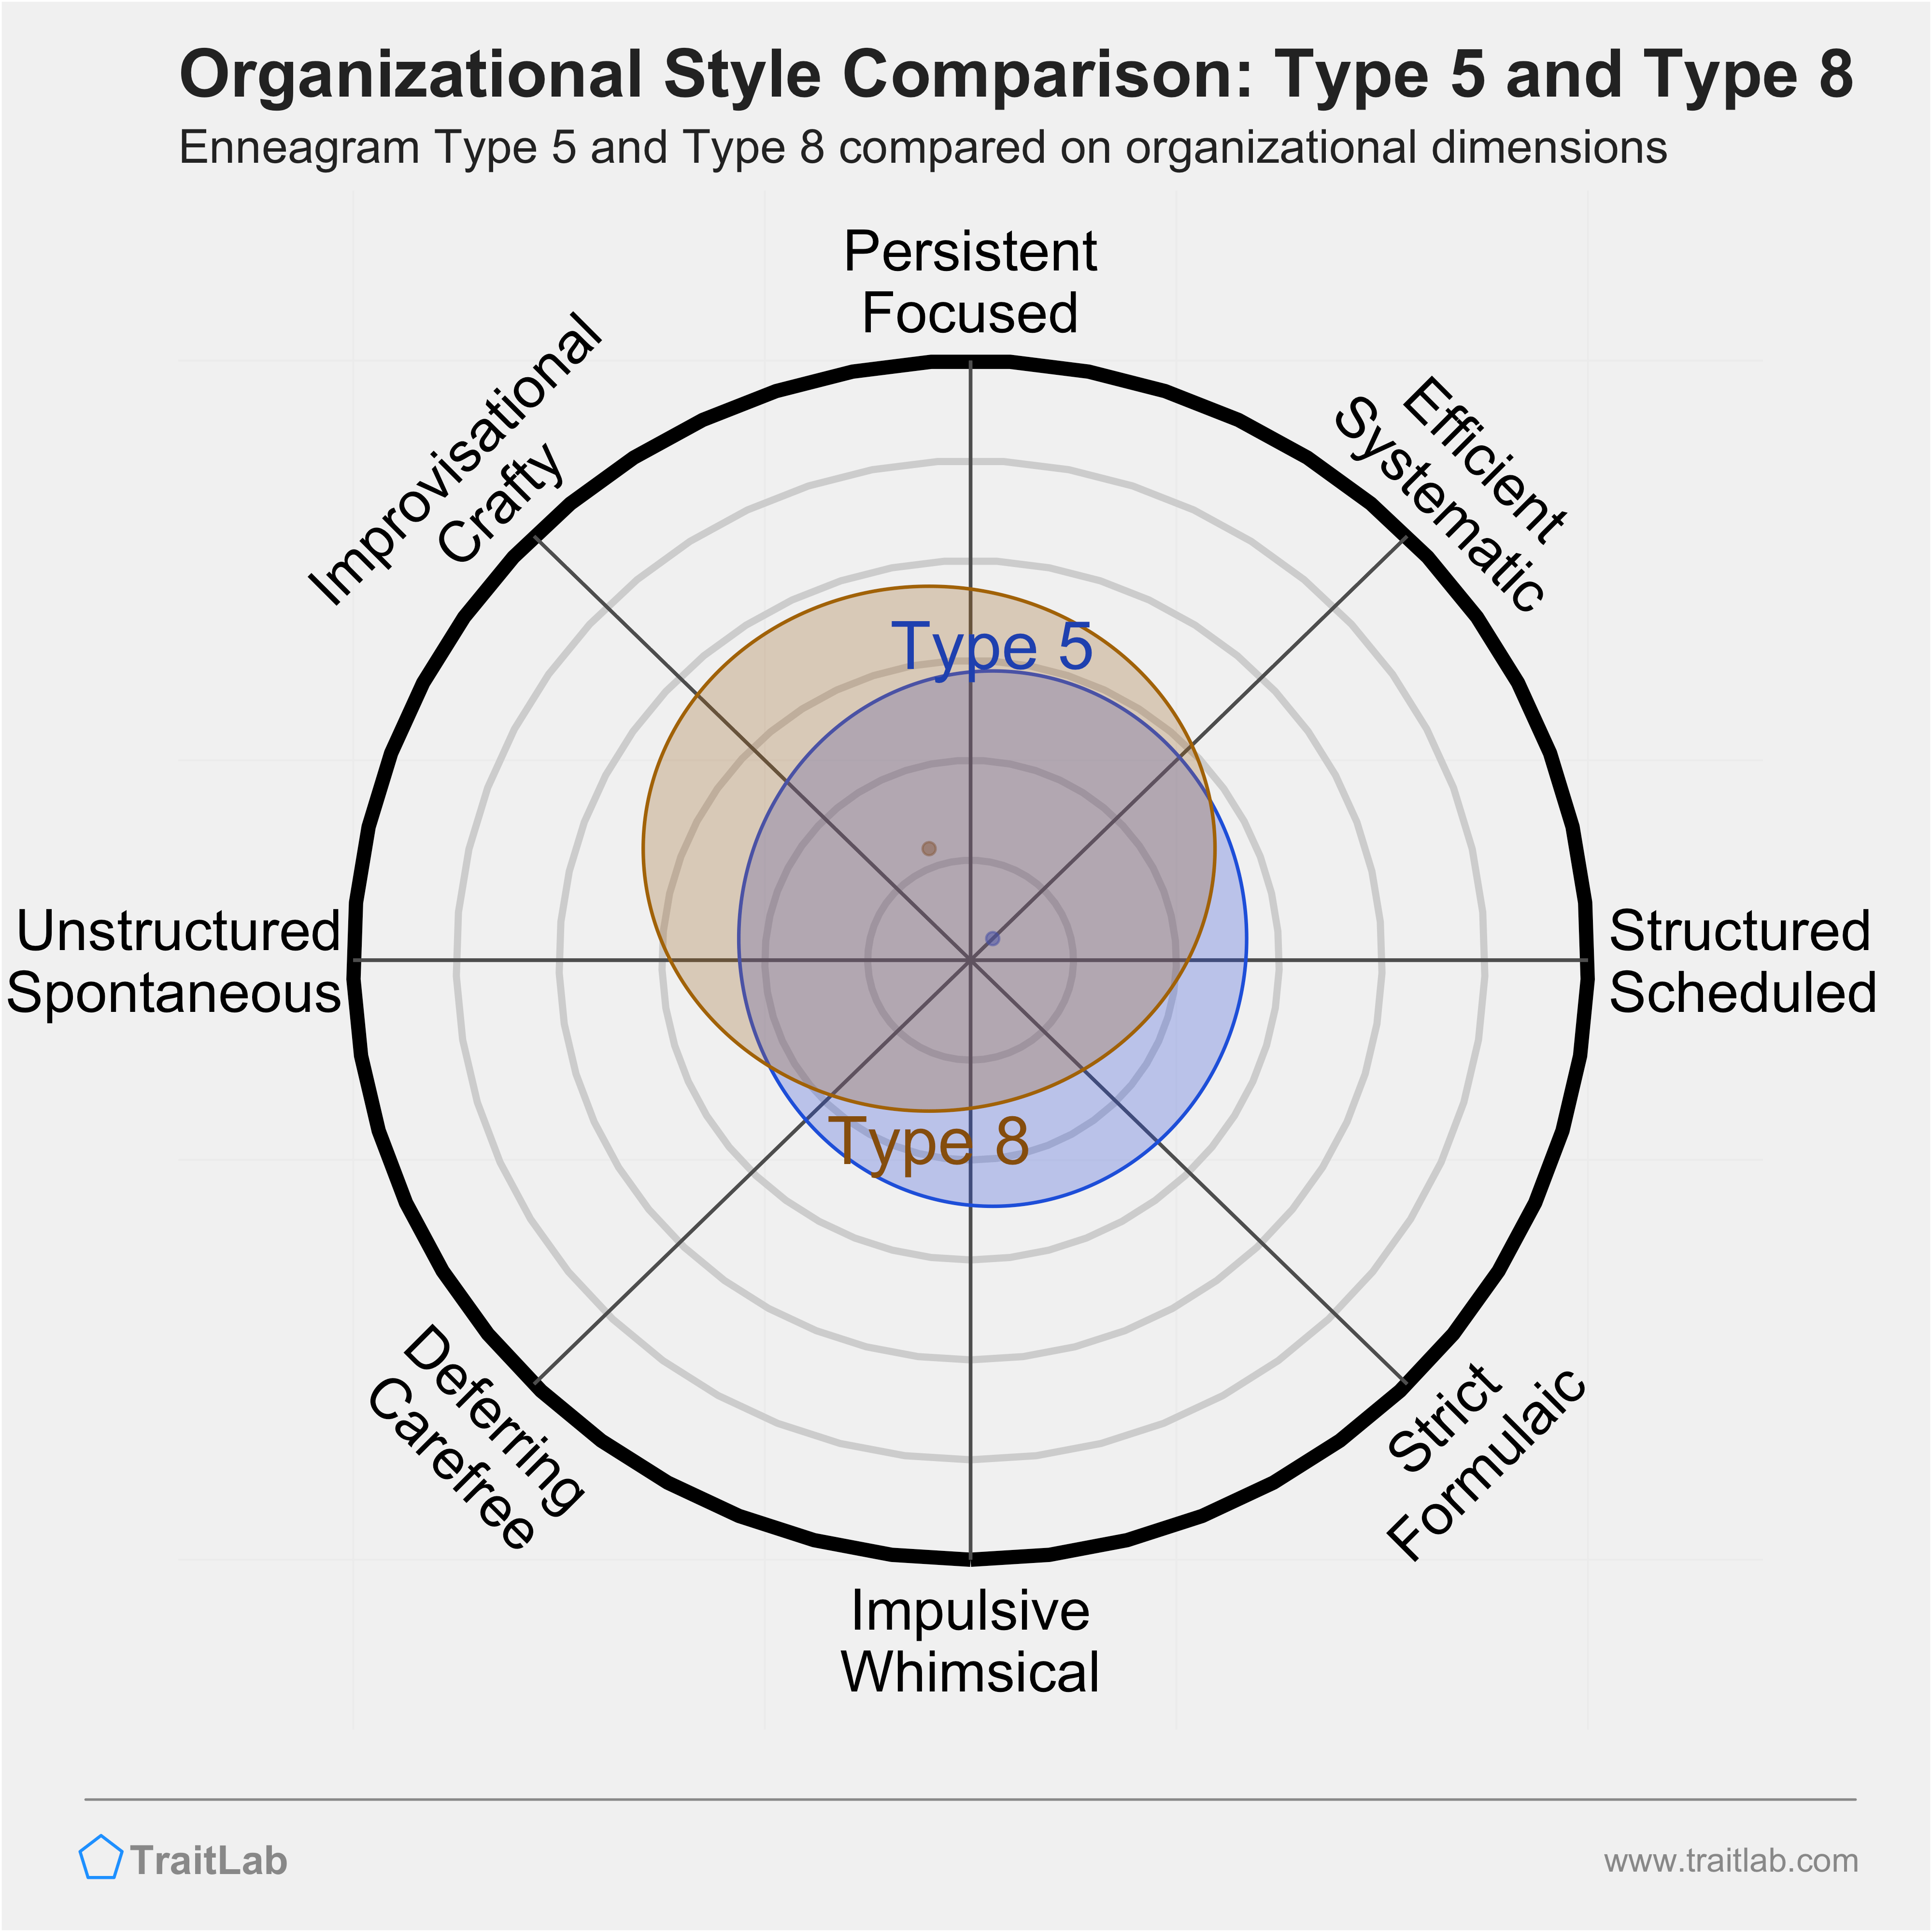 Type 5 and Type 8 comparison across organizational dimensions